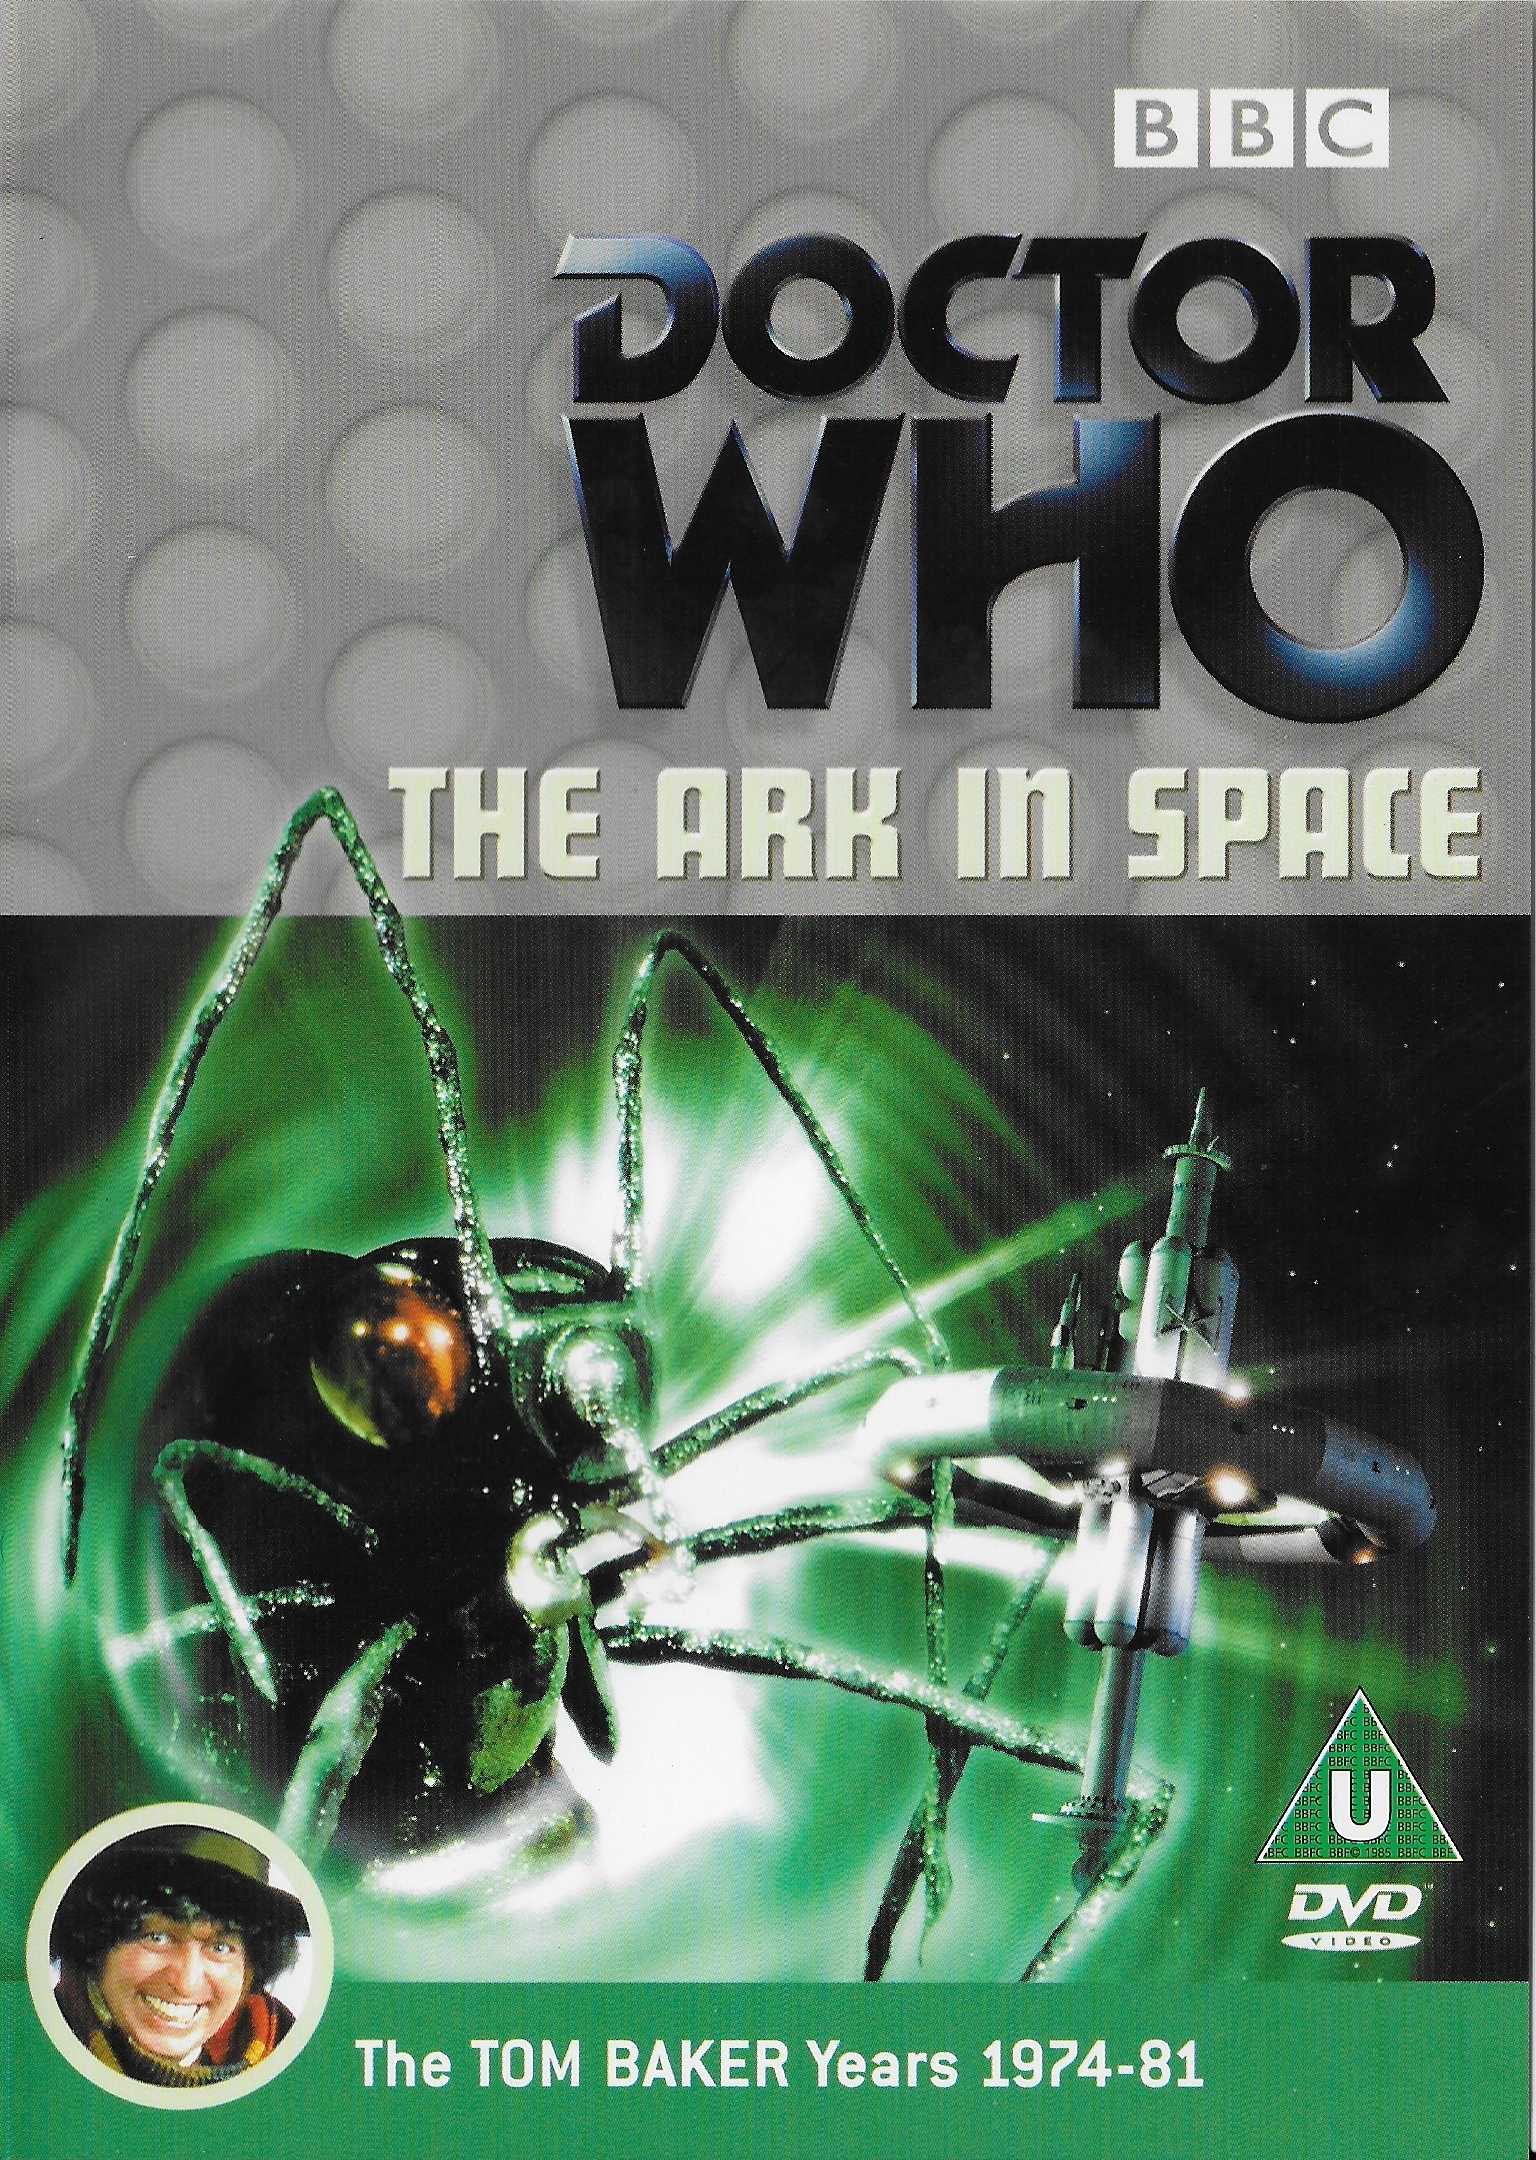 Picture of BBCDVD 1097 Doctor Who - The ark in space by artist Robert Holmes from the BBC dvds - Records and Tapes library